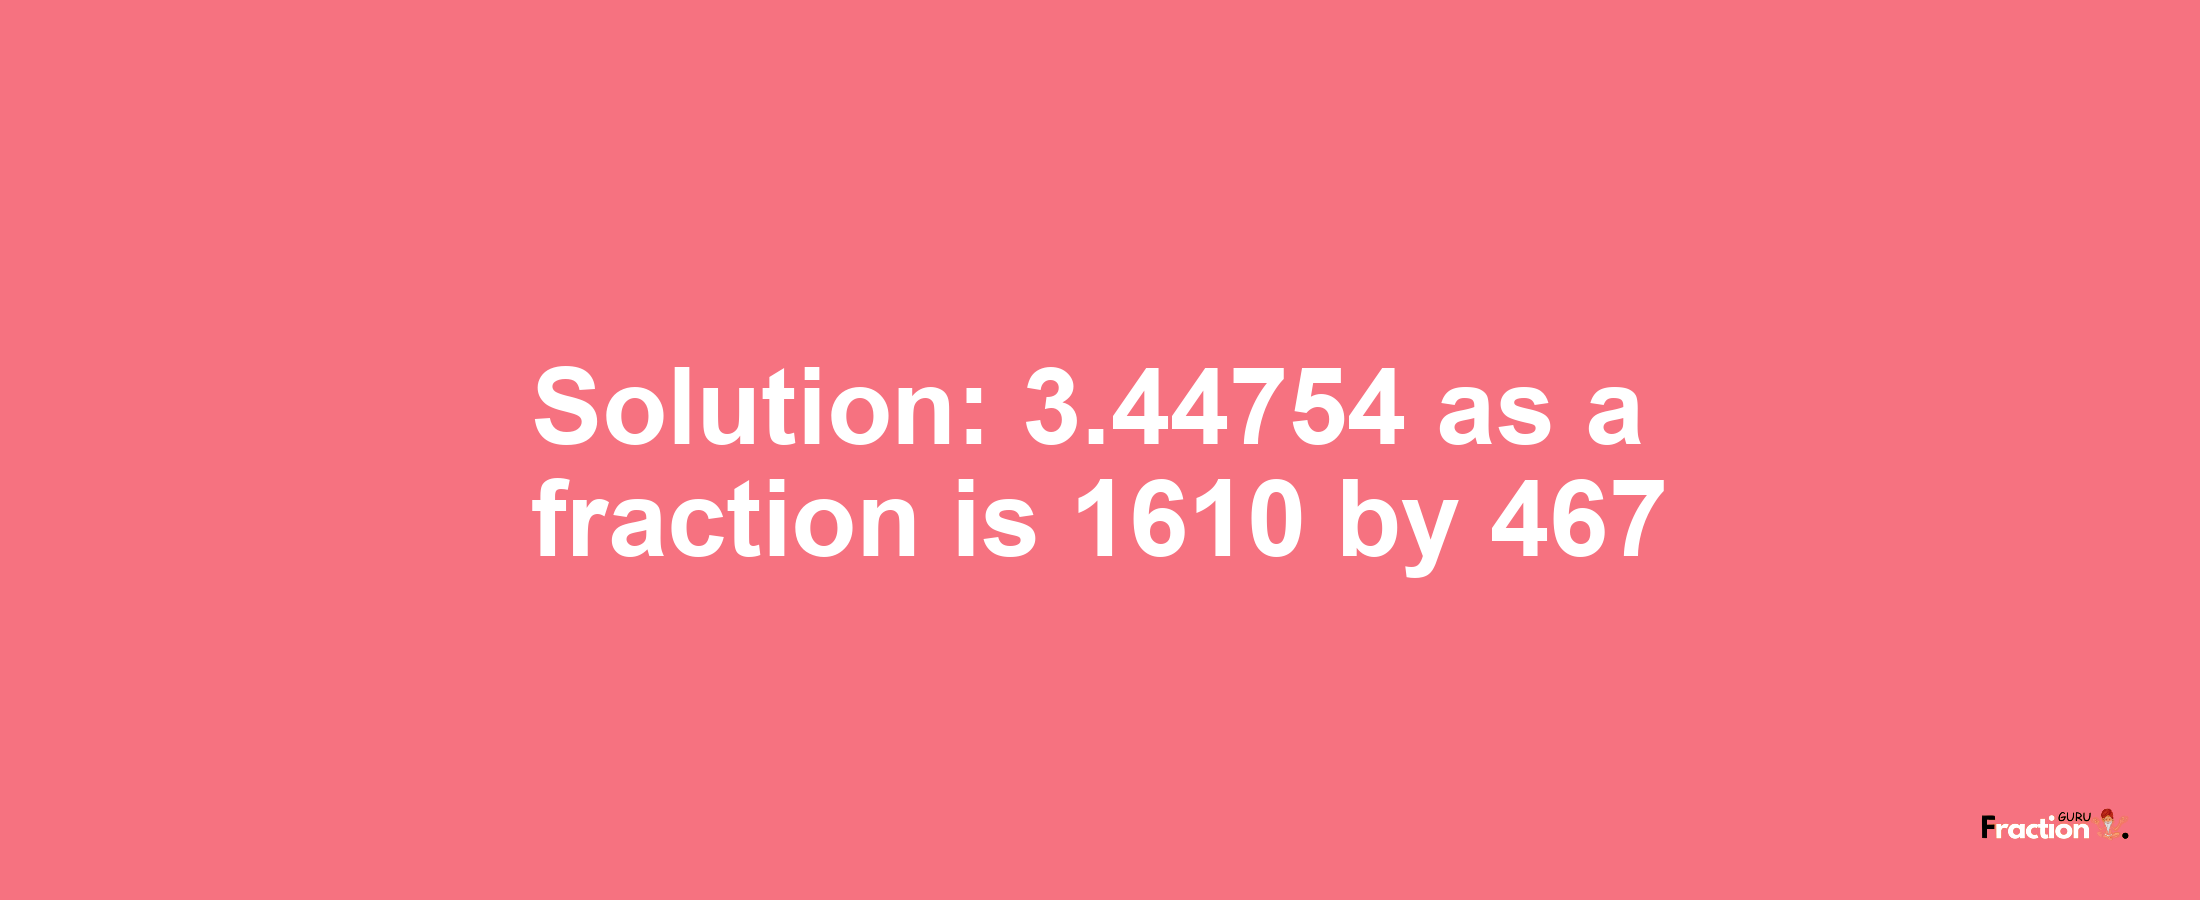 Solution:3.44754 as a fraction is 1610/467